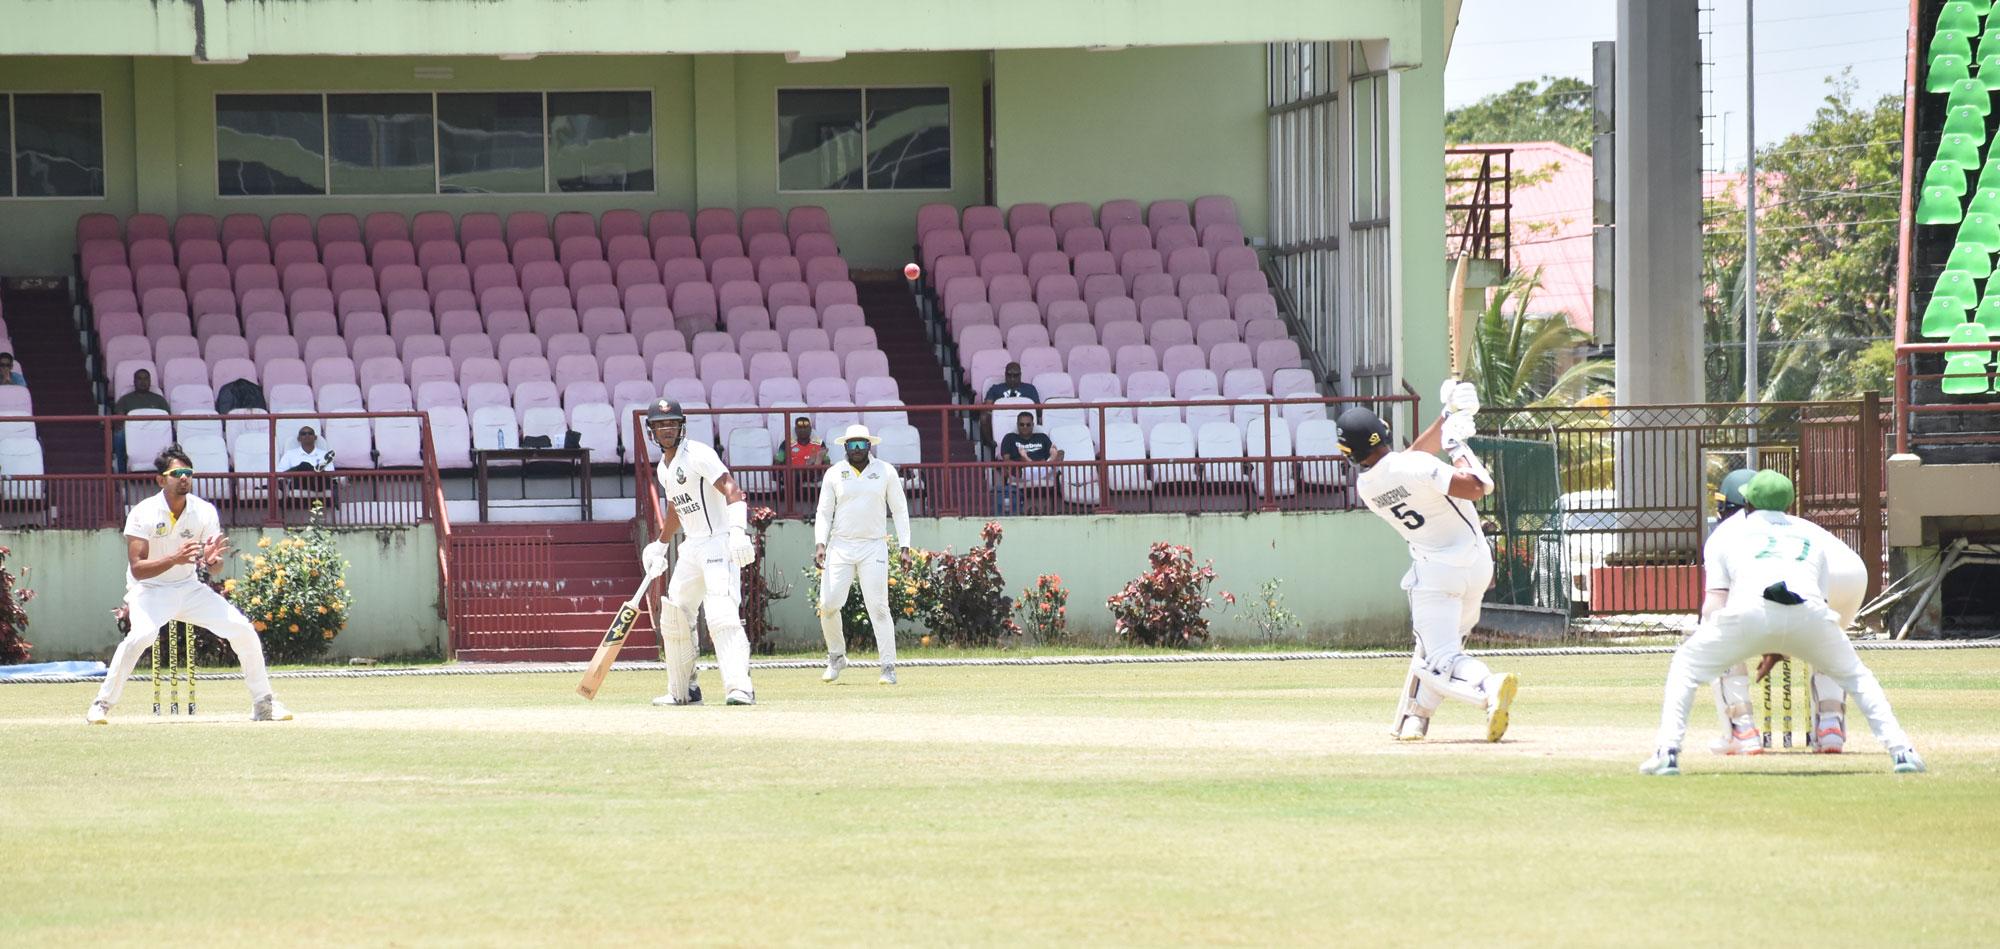 Tagenarine Chanderpaul launches Abhijai Mansingh to the long-on boundary during his innings of 89.